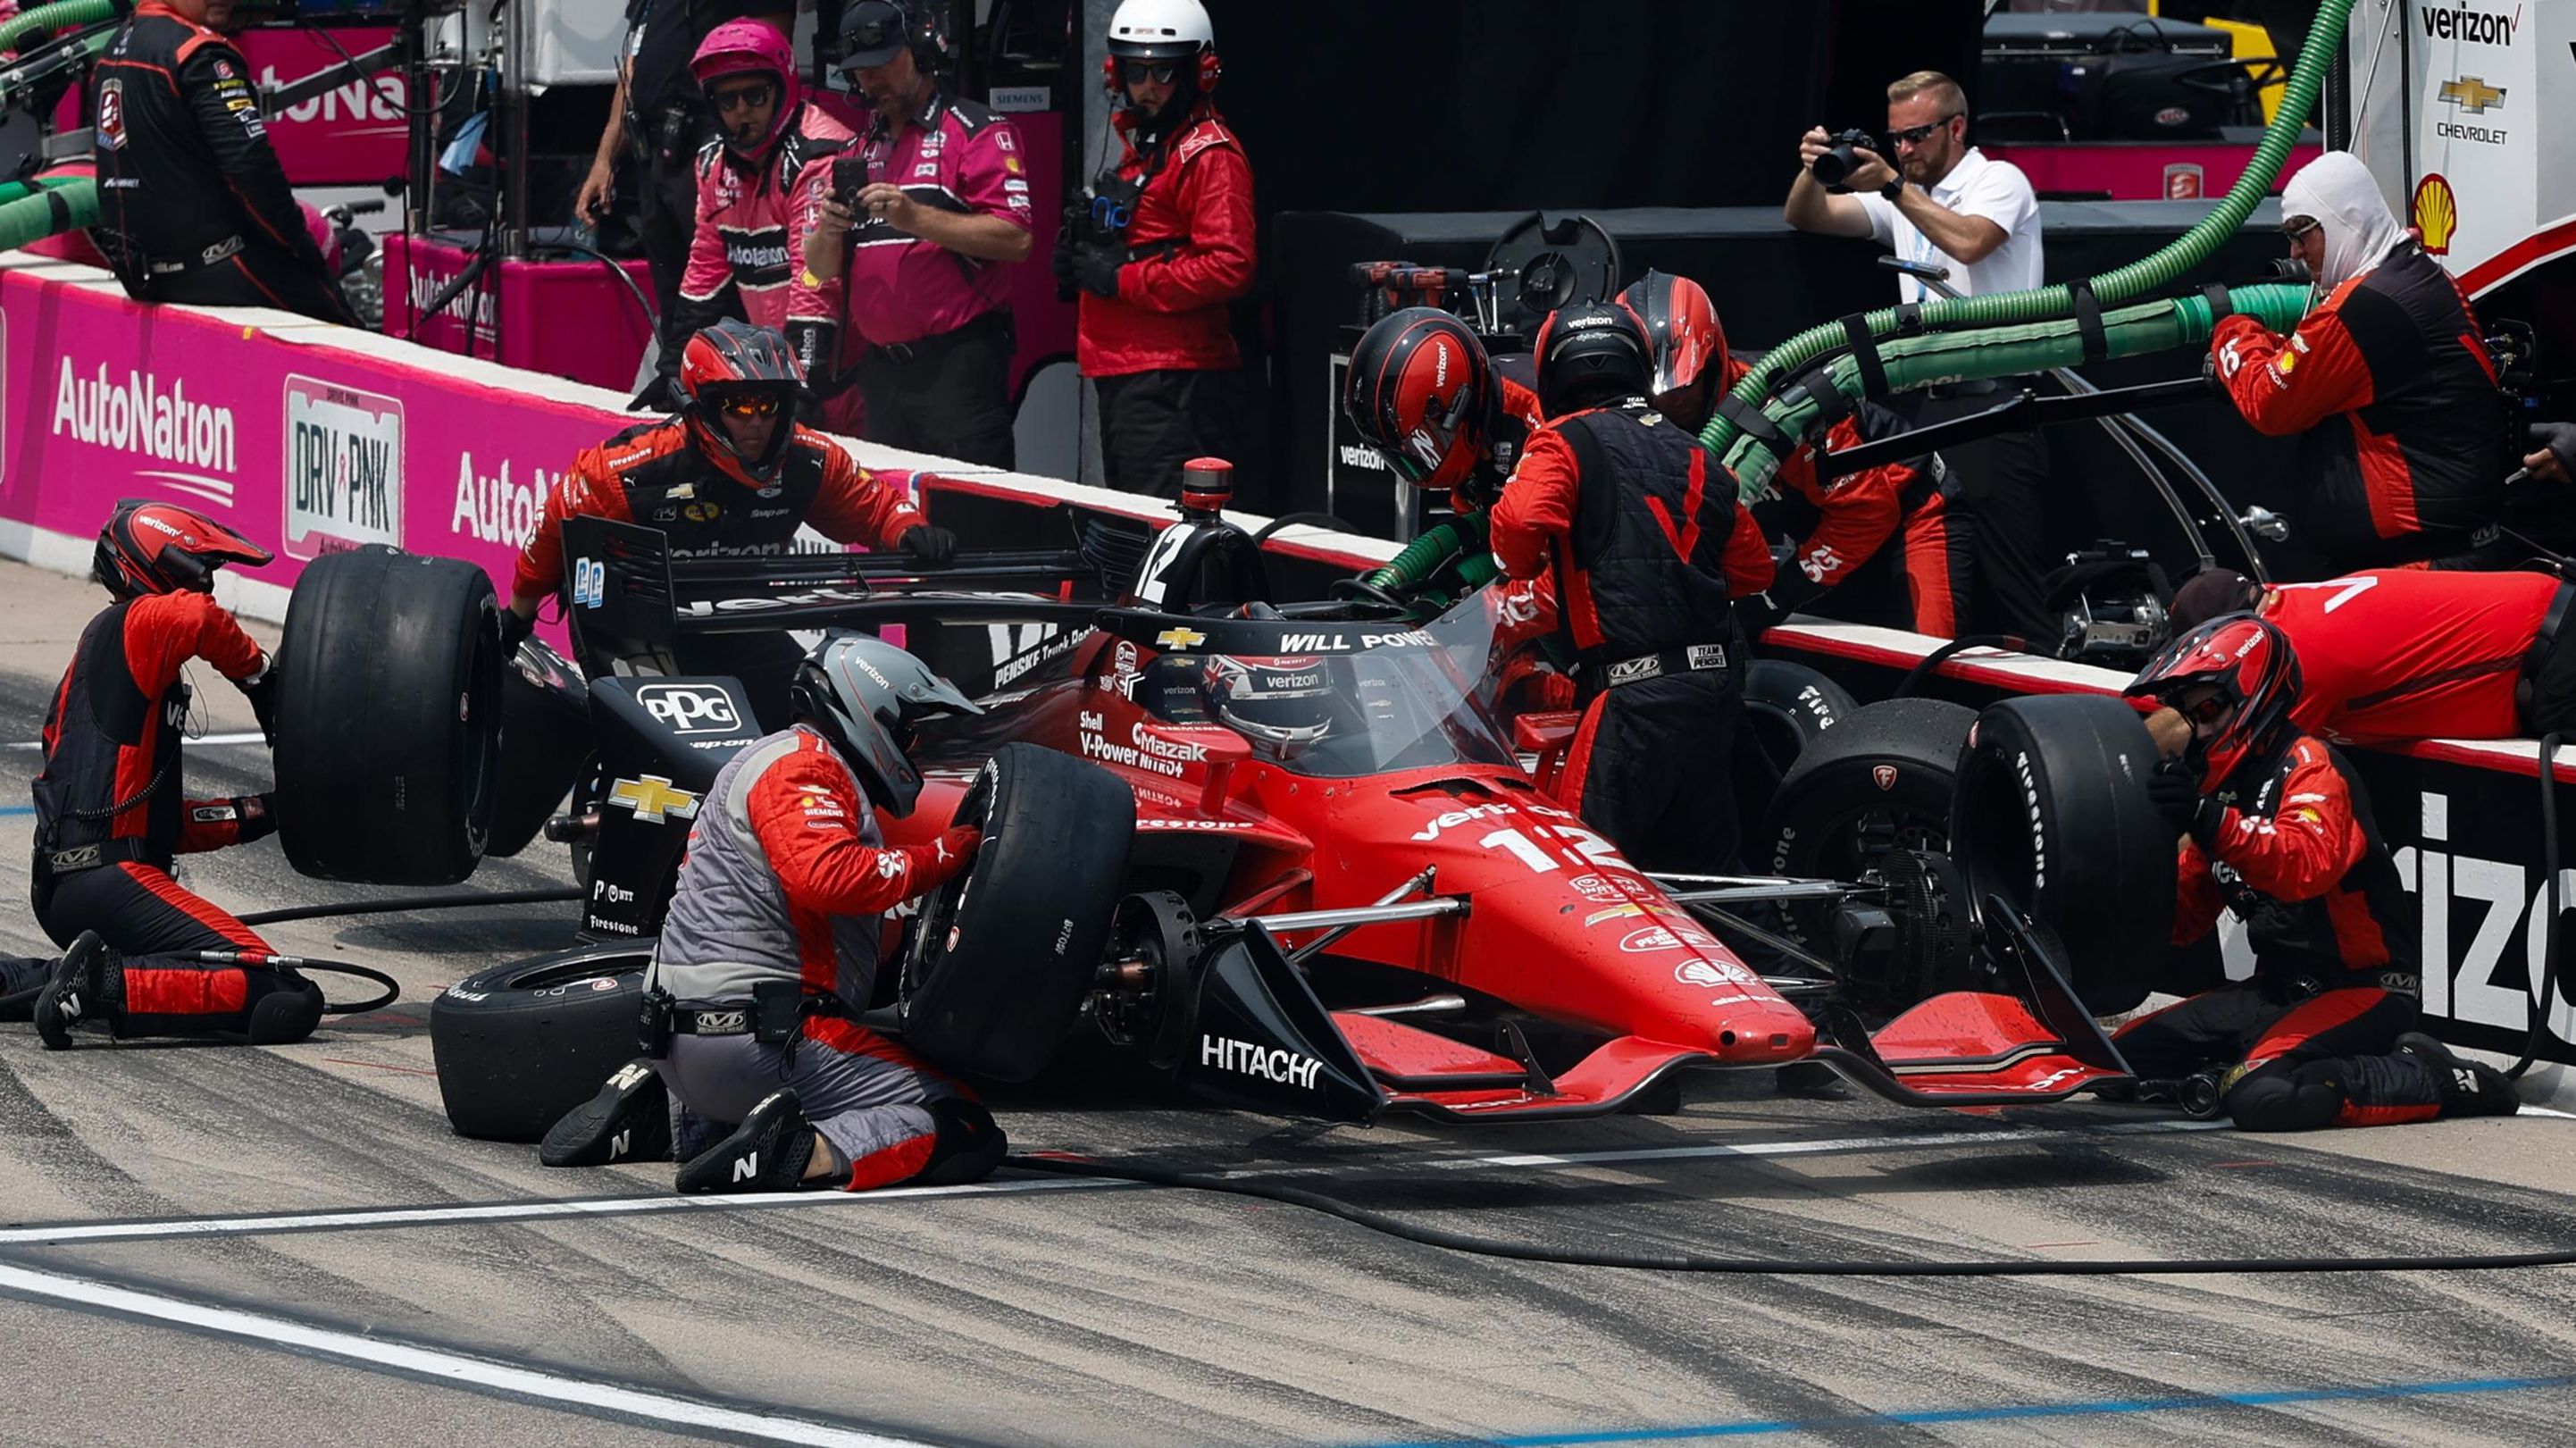 Team Penske reduced the amount of downforce in a pit stop by reducing the front wing angle.